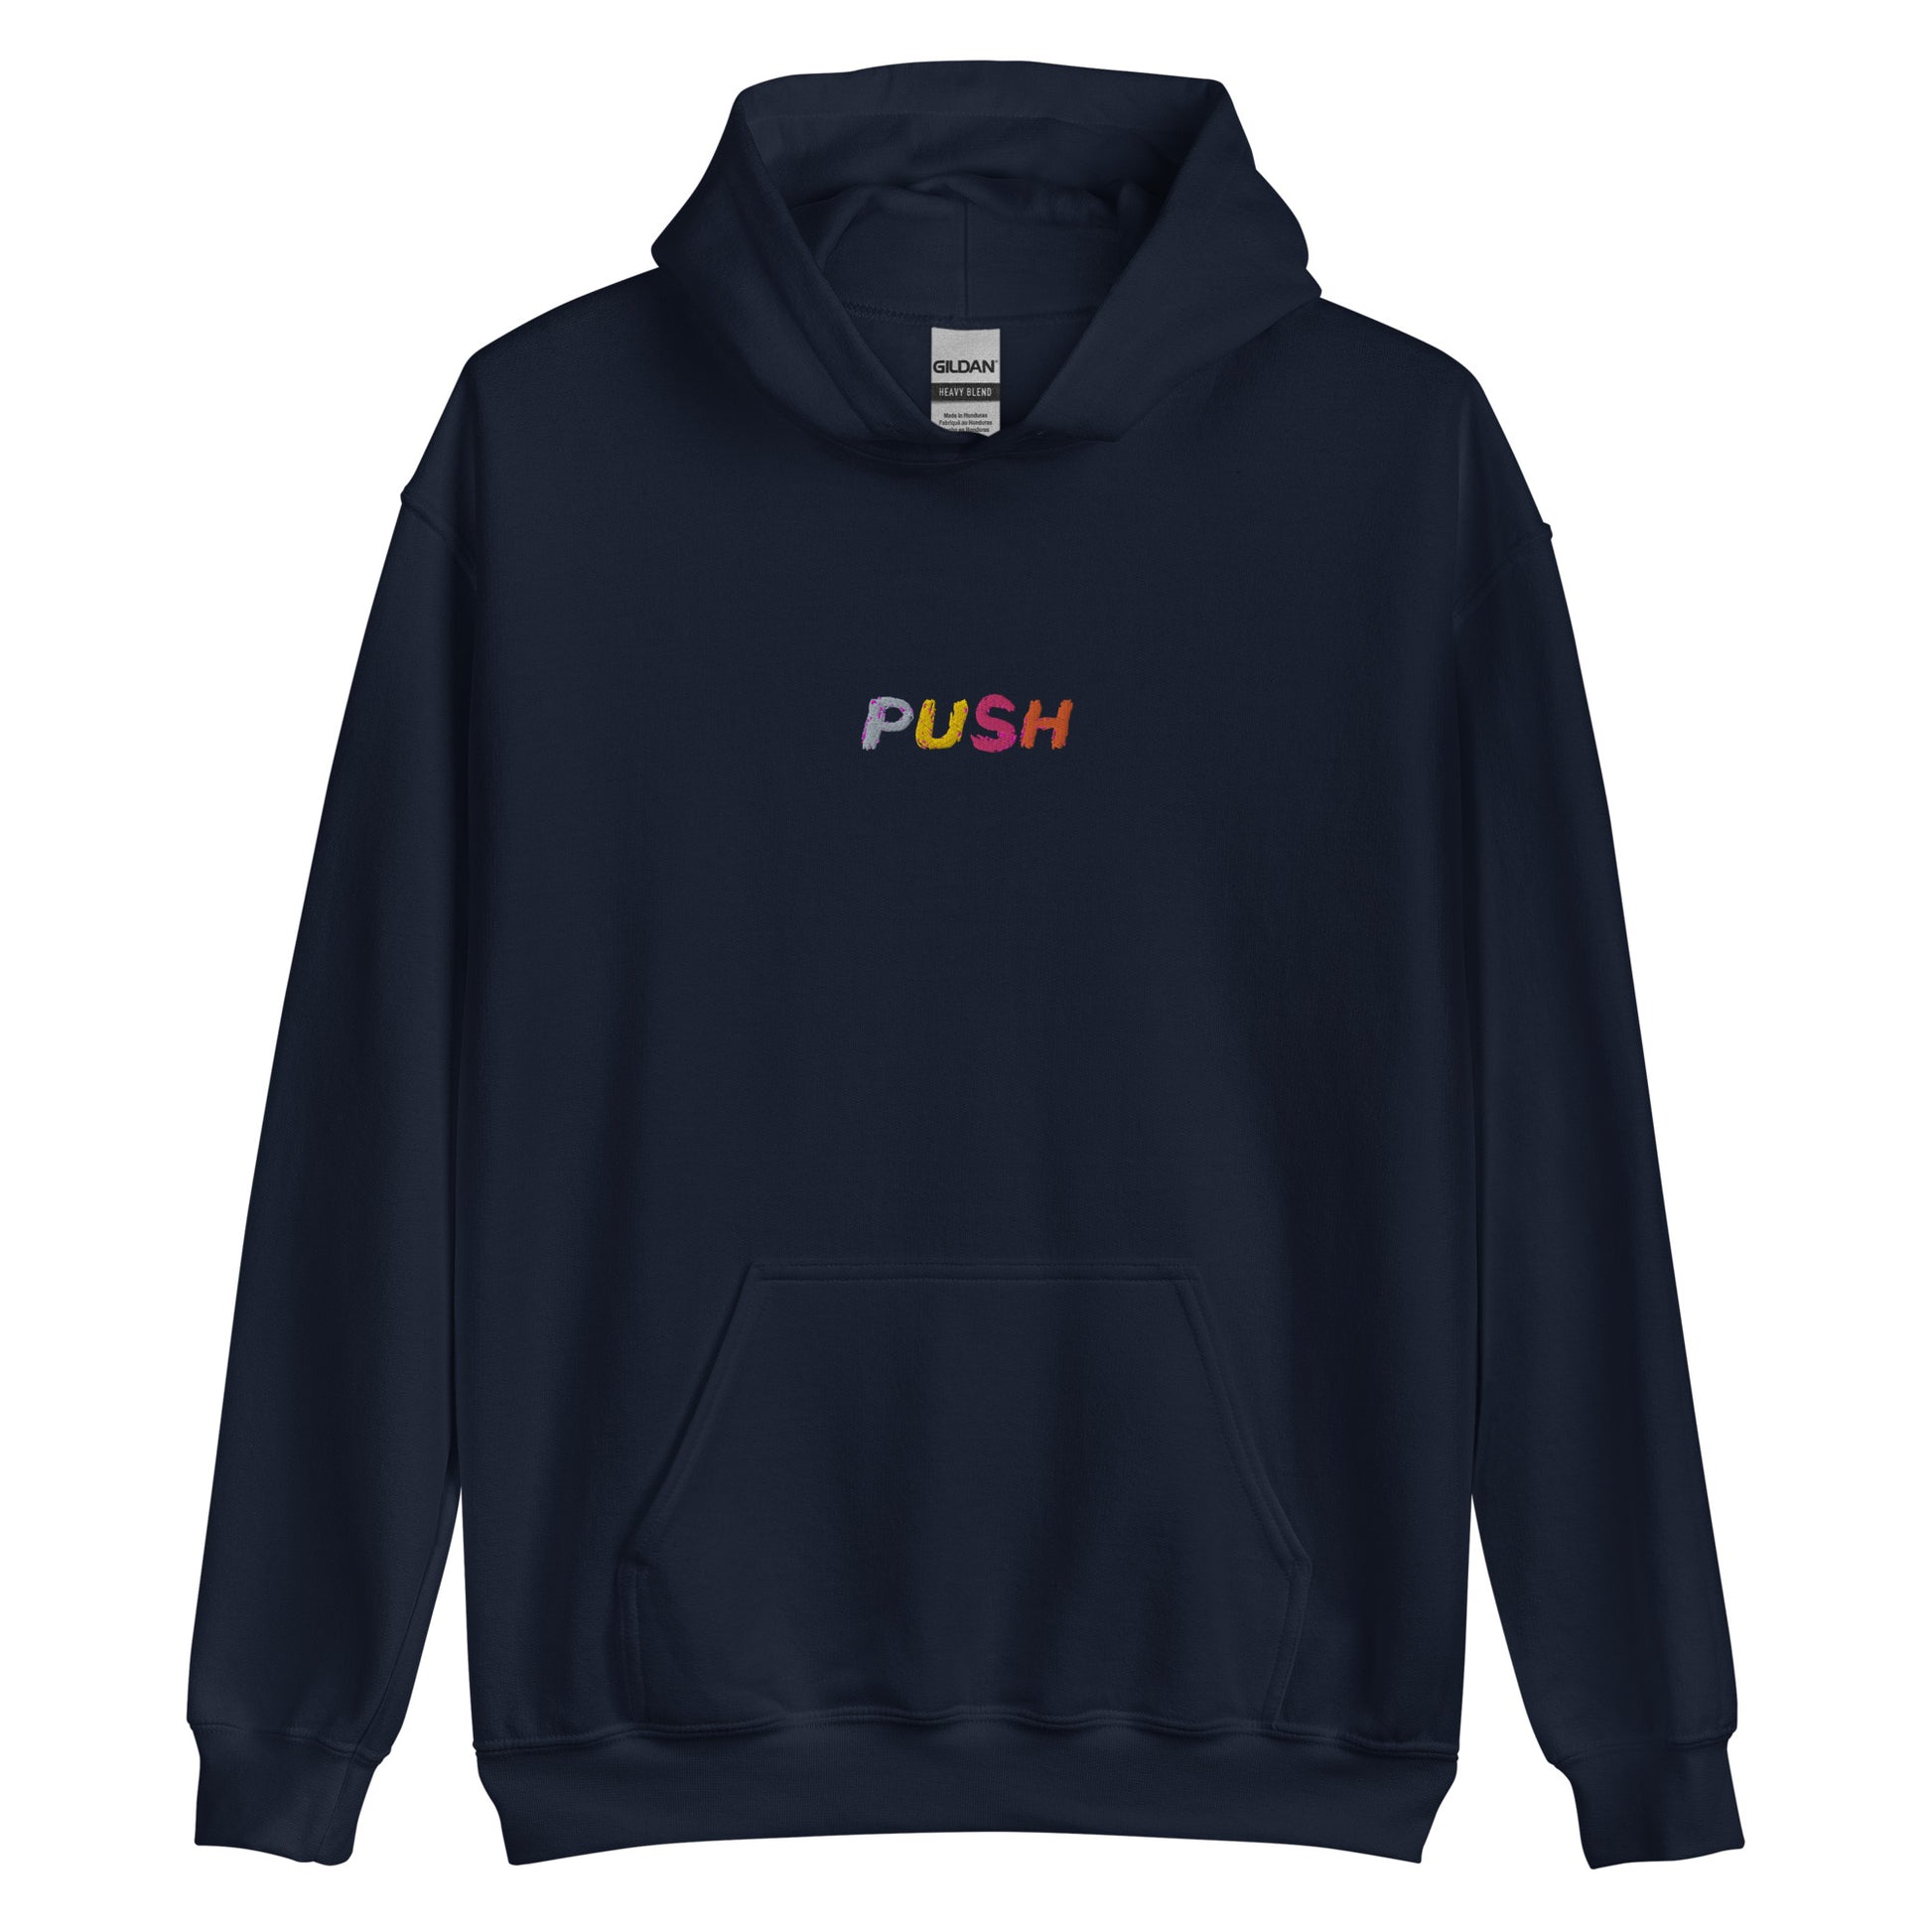 PUSH Embroidered Hoodie - blue / S - Shirts & Tops